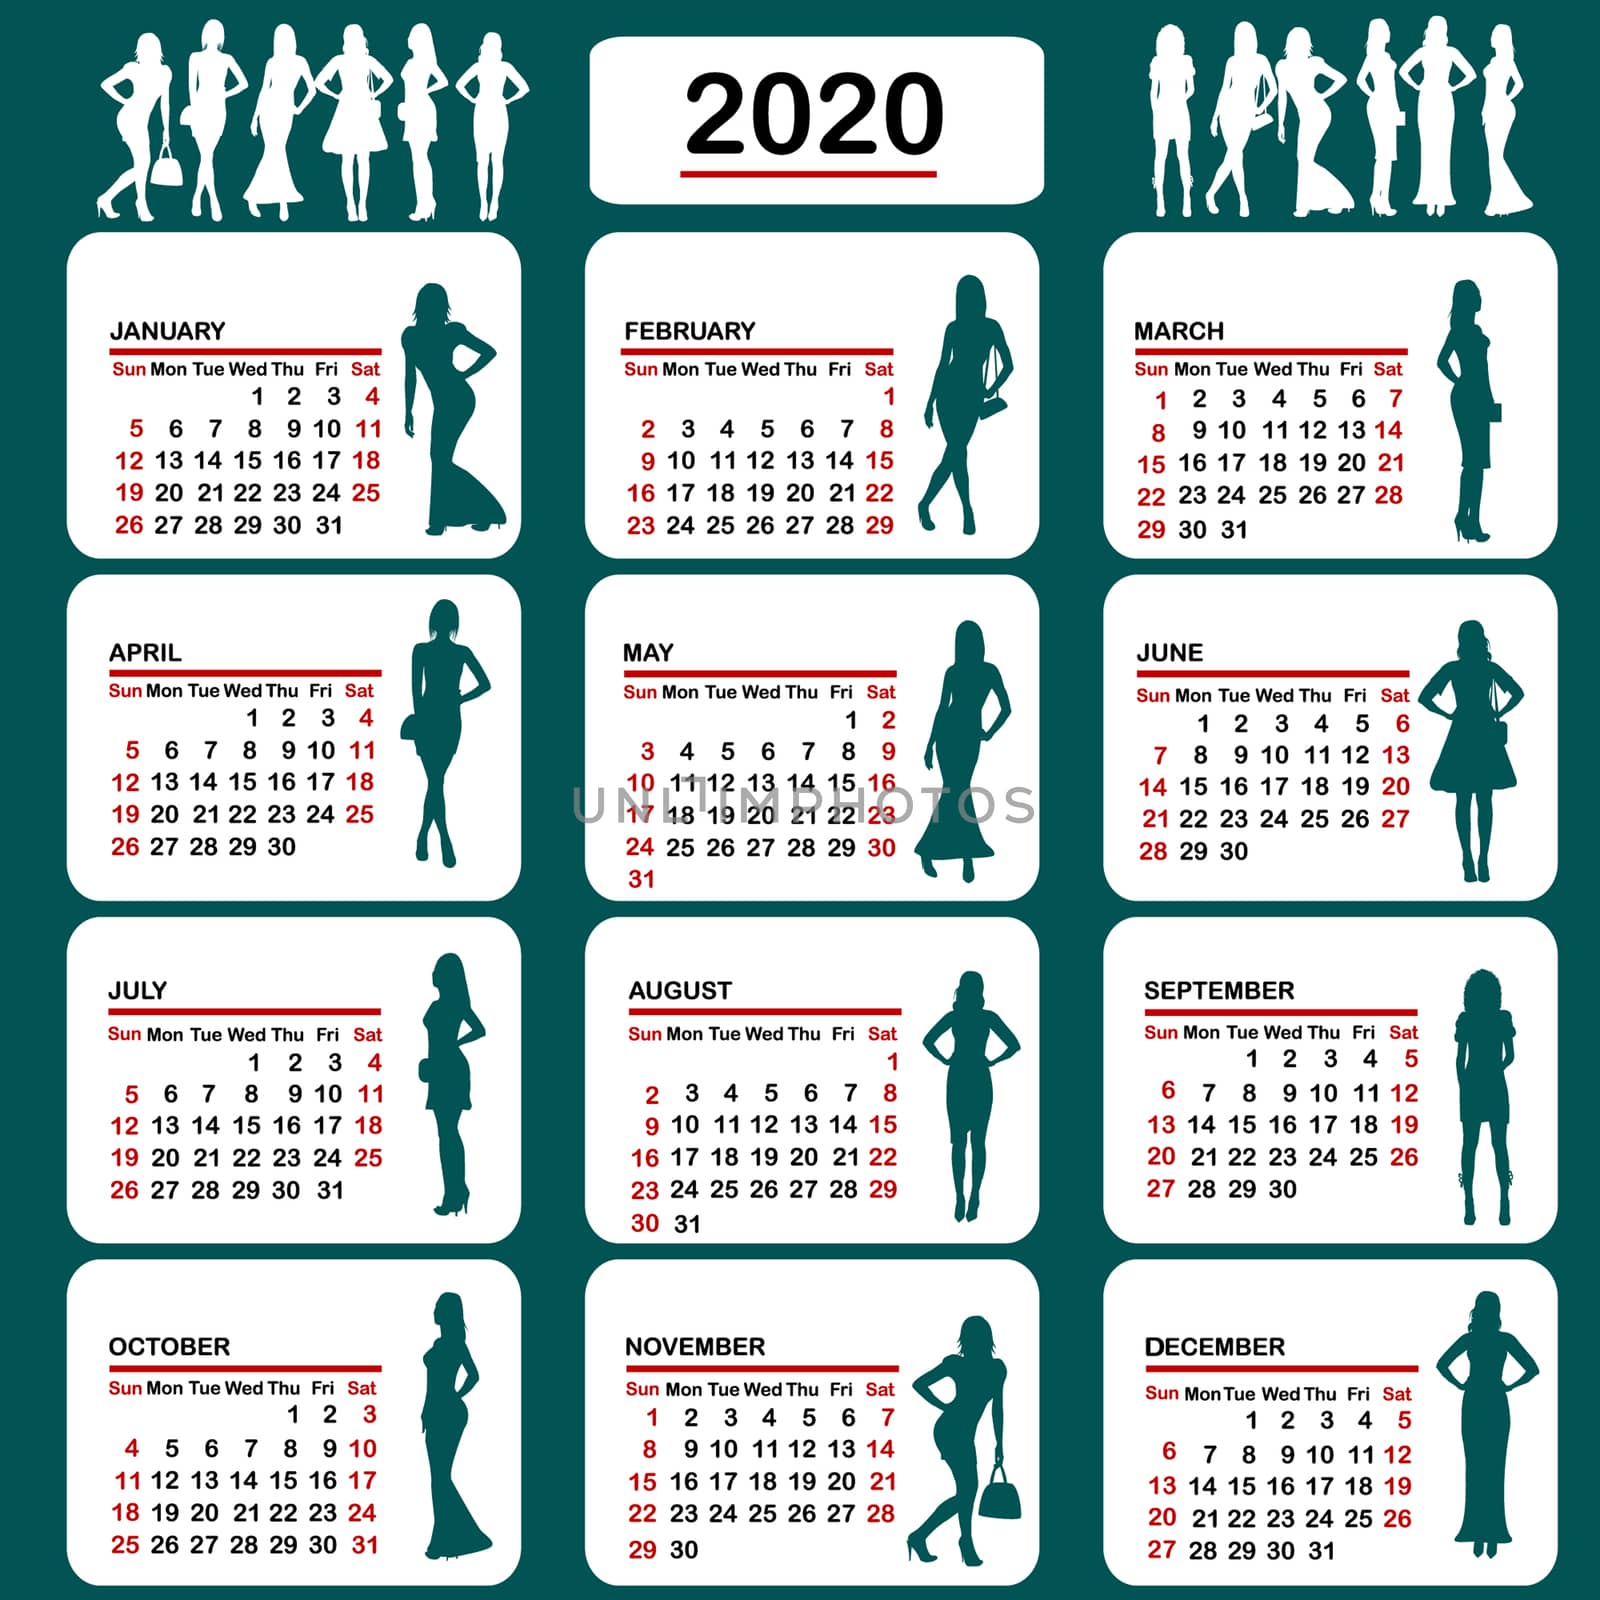 2020 calendar with fashion silhouettes of women